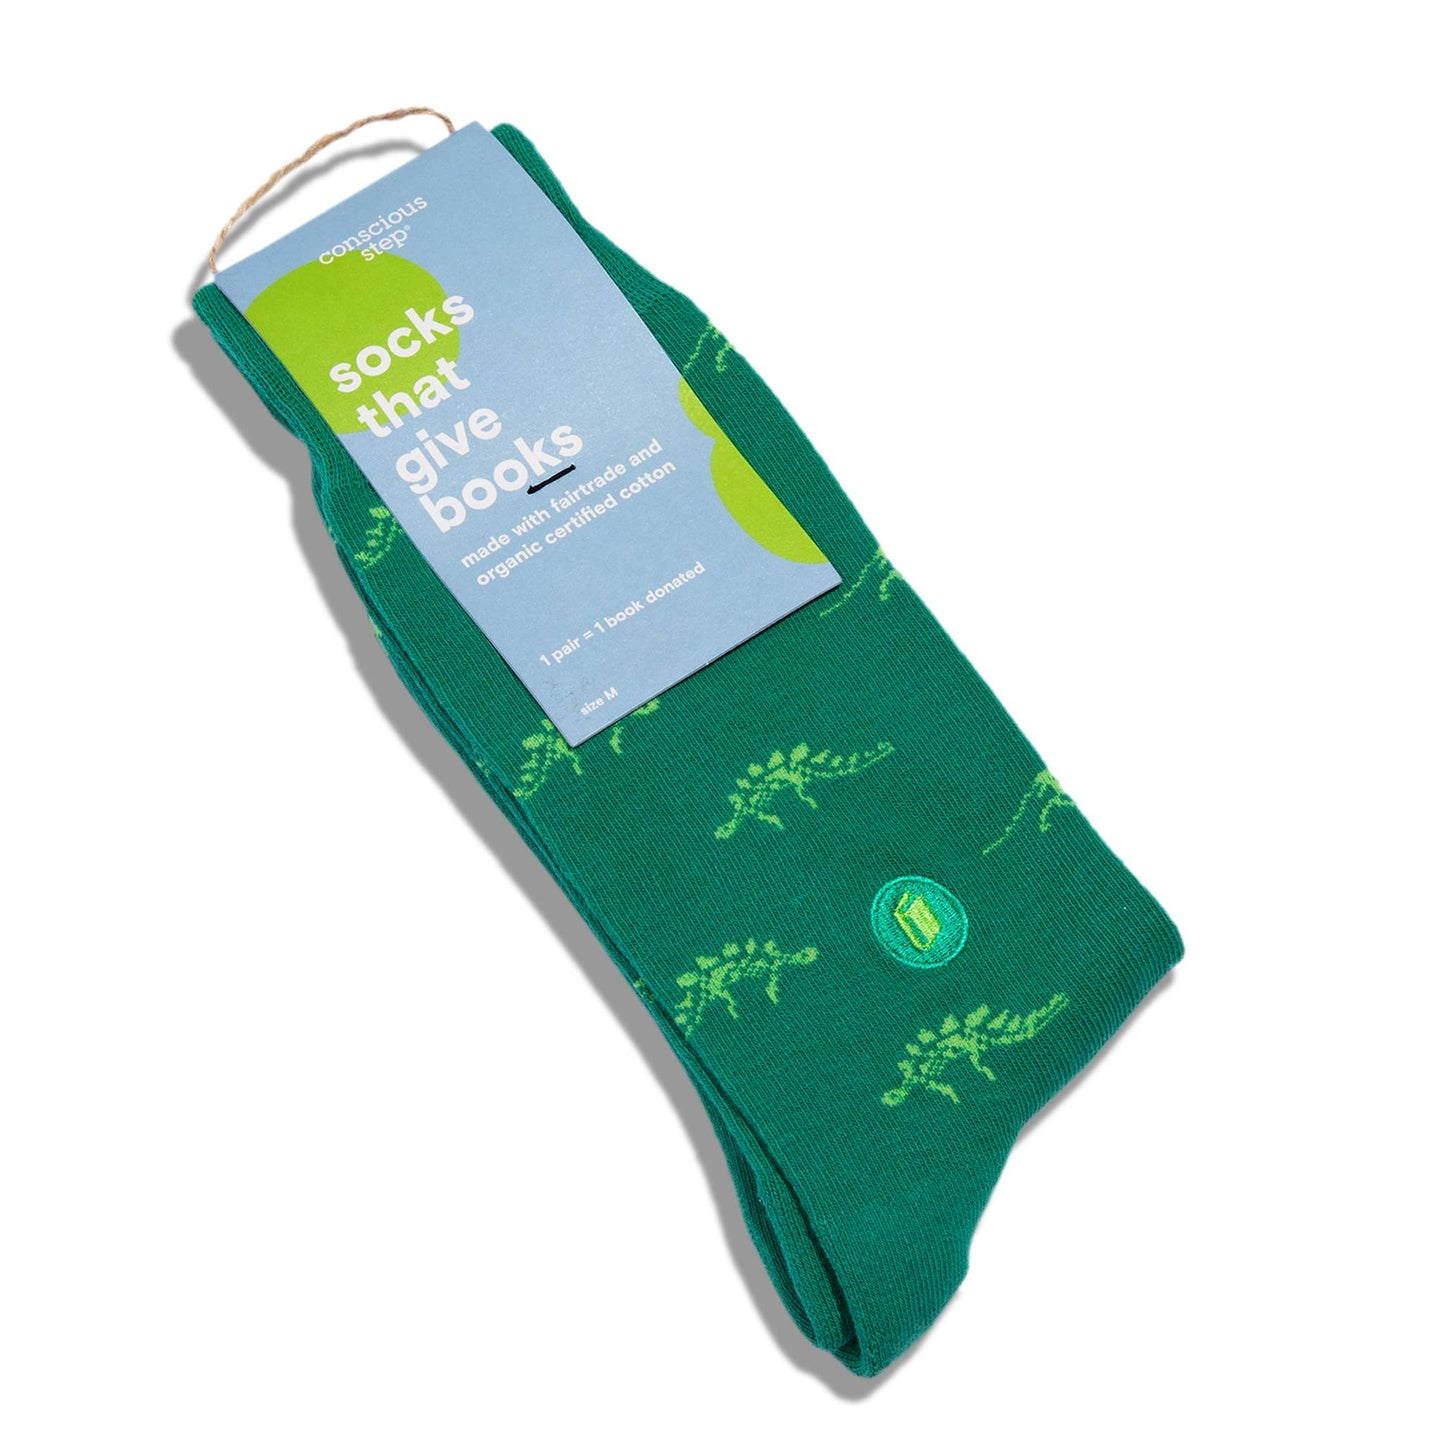 Conscious Step - Socks that Give Books  (Green Dinosaurs)